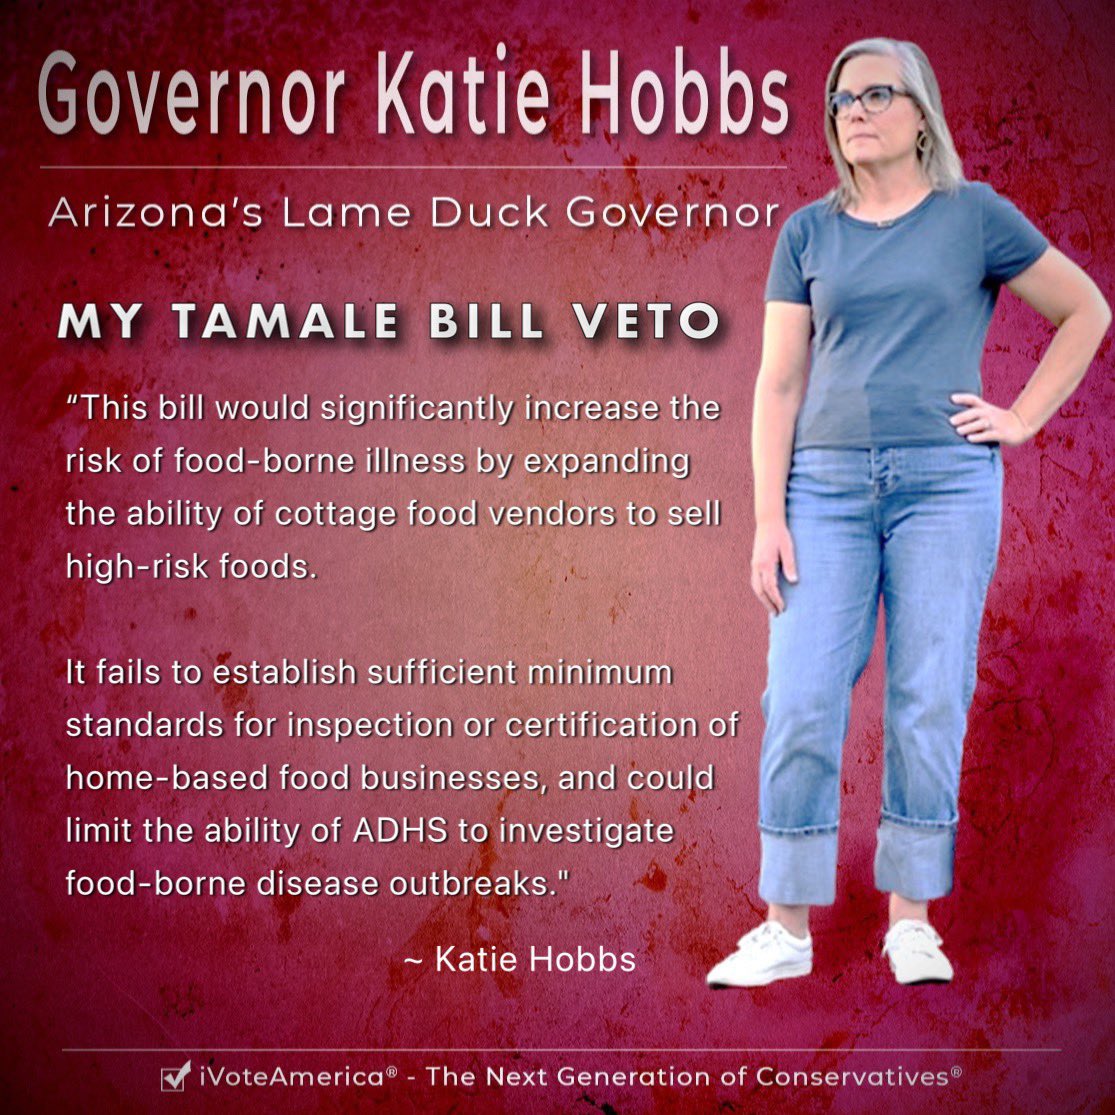 KATIE WATCH:  Her Tamale  Veto

She’s gone and done it. @GovernorHobbs has vetoed HB2509, the “Tamale Bill” claiming that allowing citizens to make and sell tamales is dangerous to public health.

This is Hobbs at work, using the state to block AZ’s 100+ yr old tamale industry.